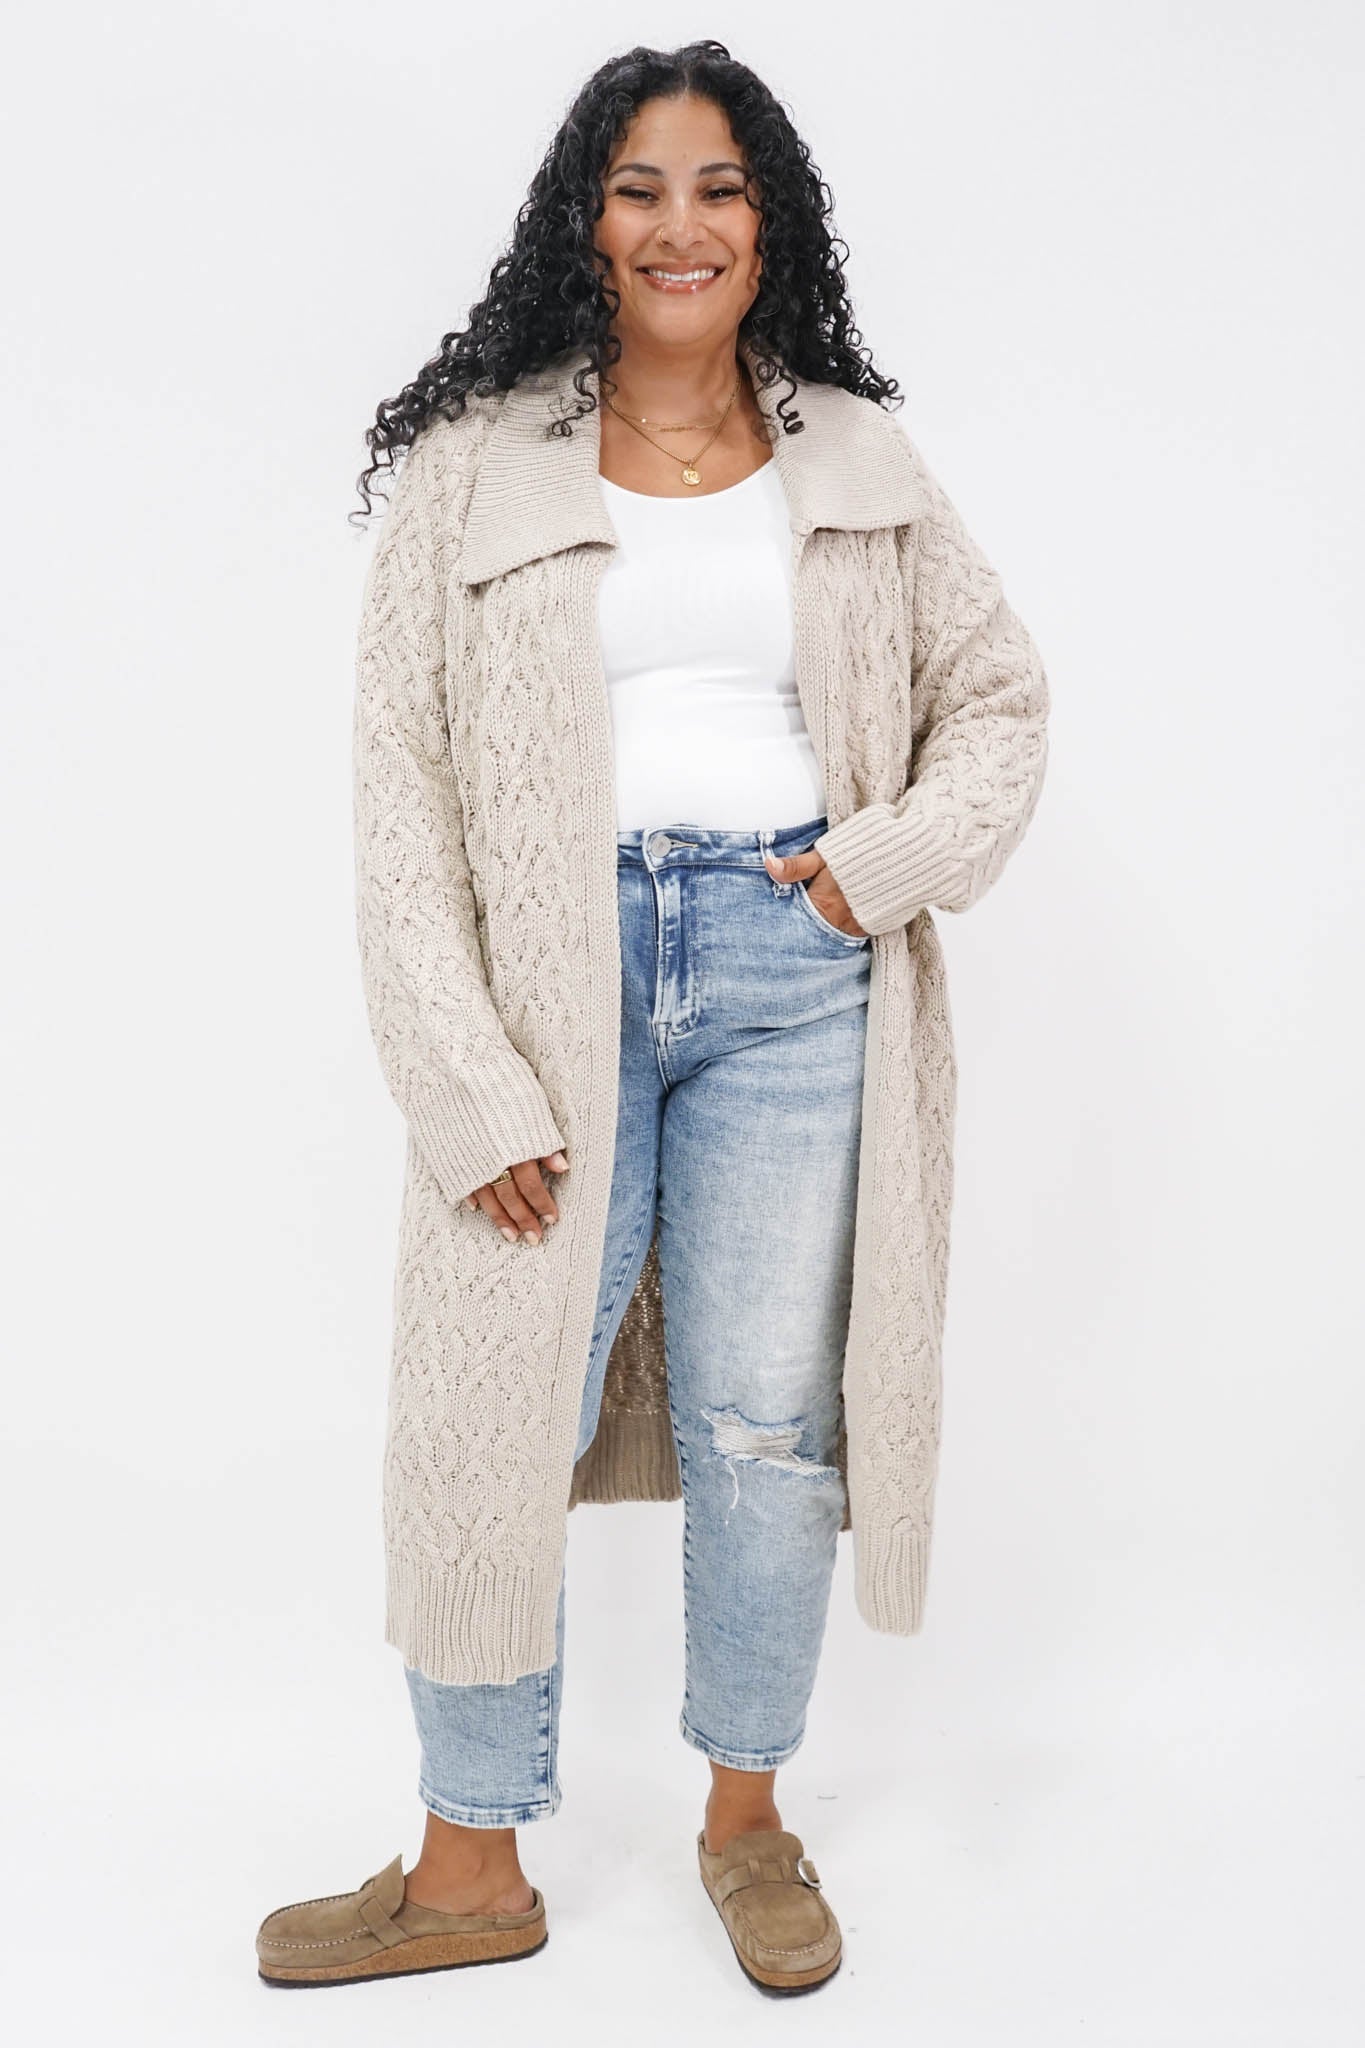 Express, Cable Knit Duster Cardigan in Swan